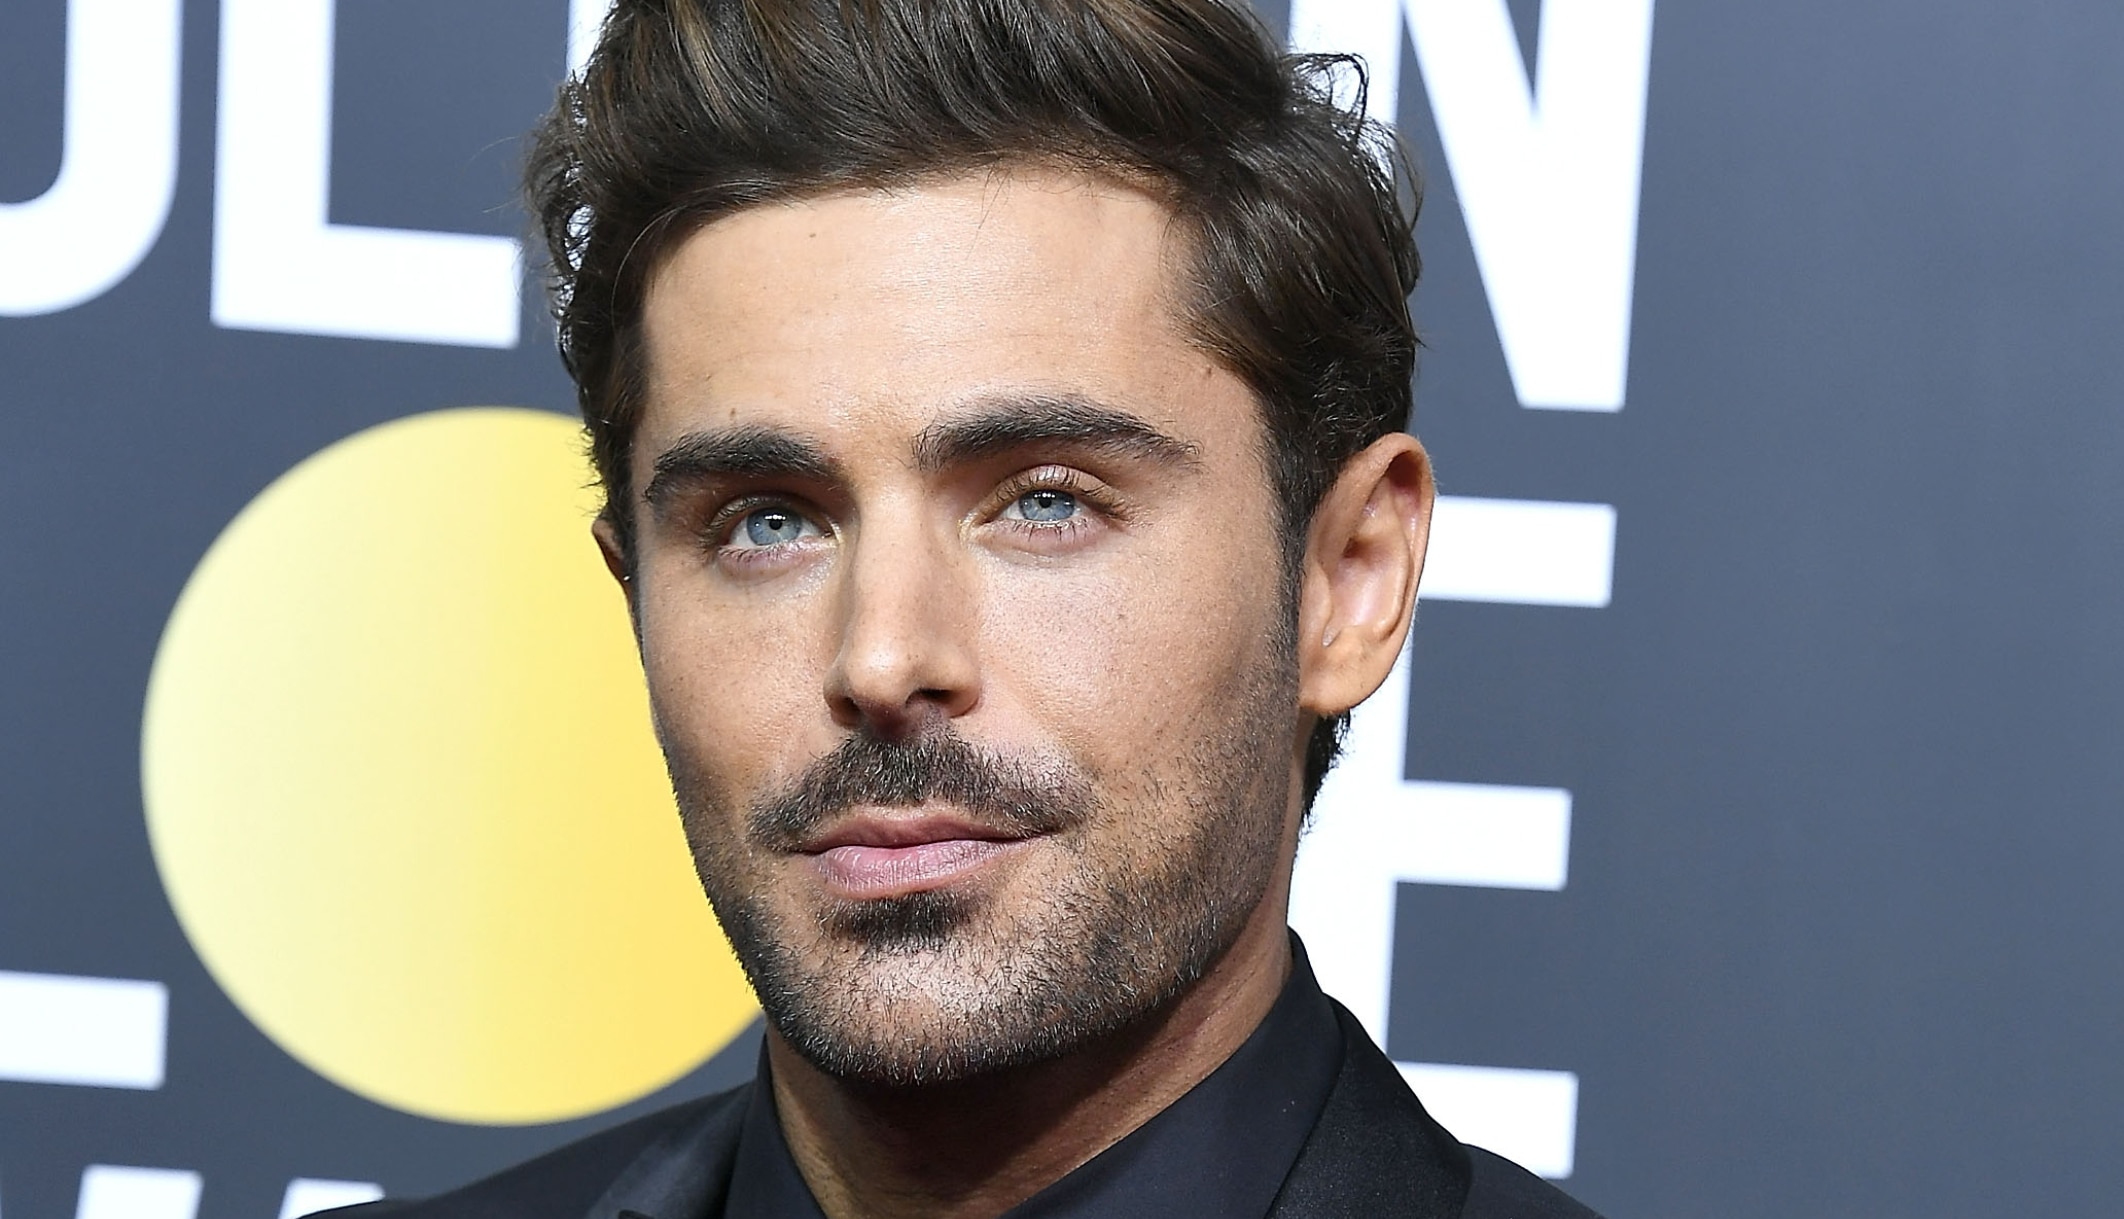 Zac Efron at the 2018 Golden Globes